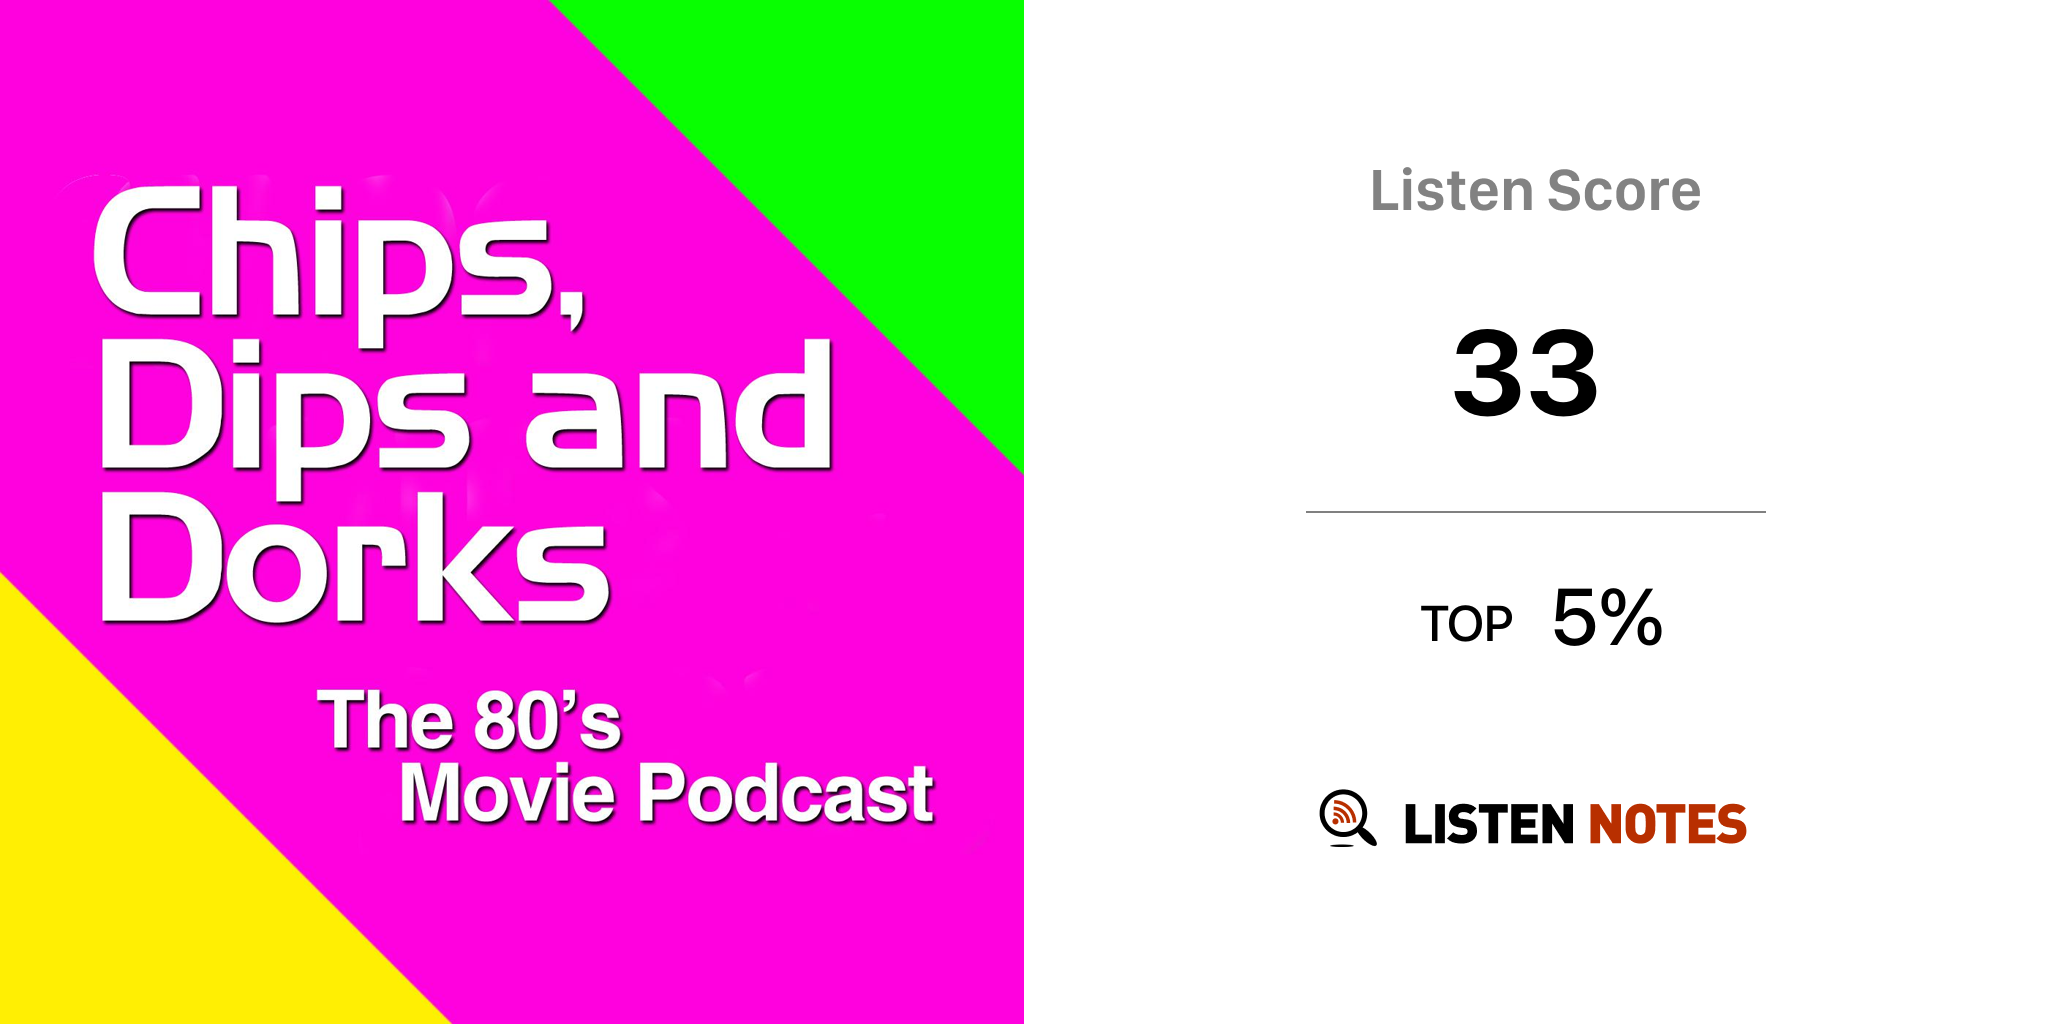 Listen to The 80s Movie Podcast podcast